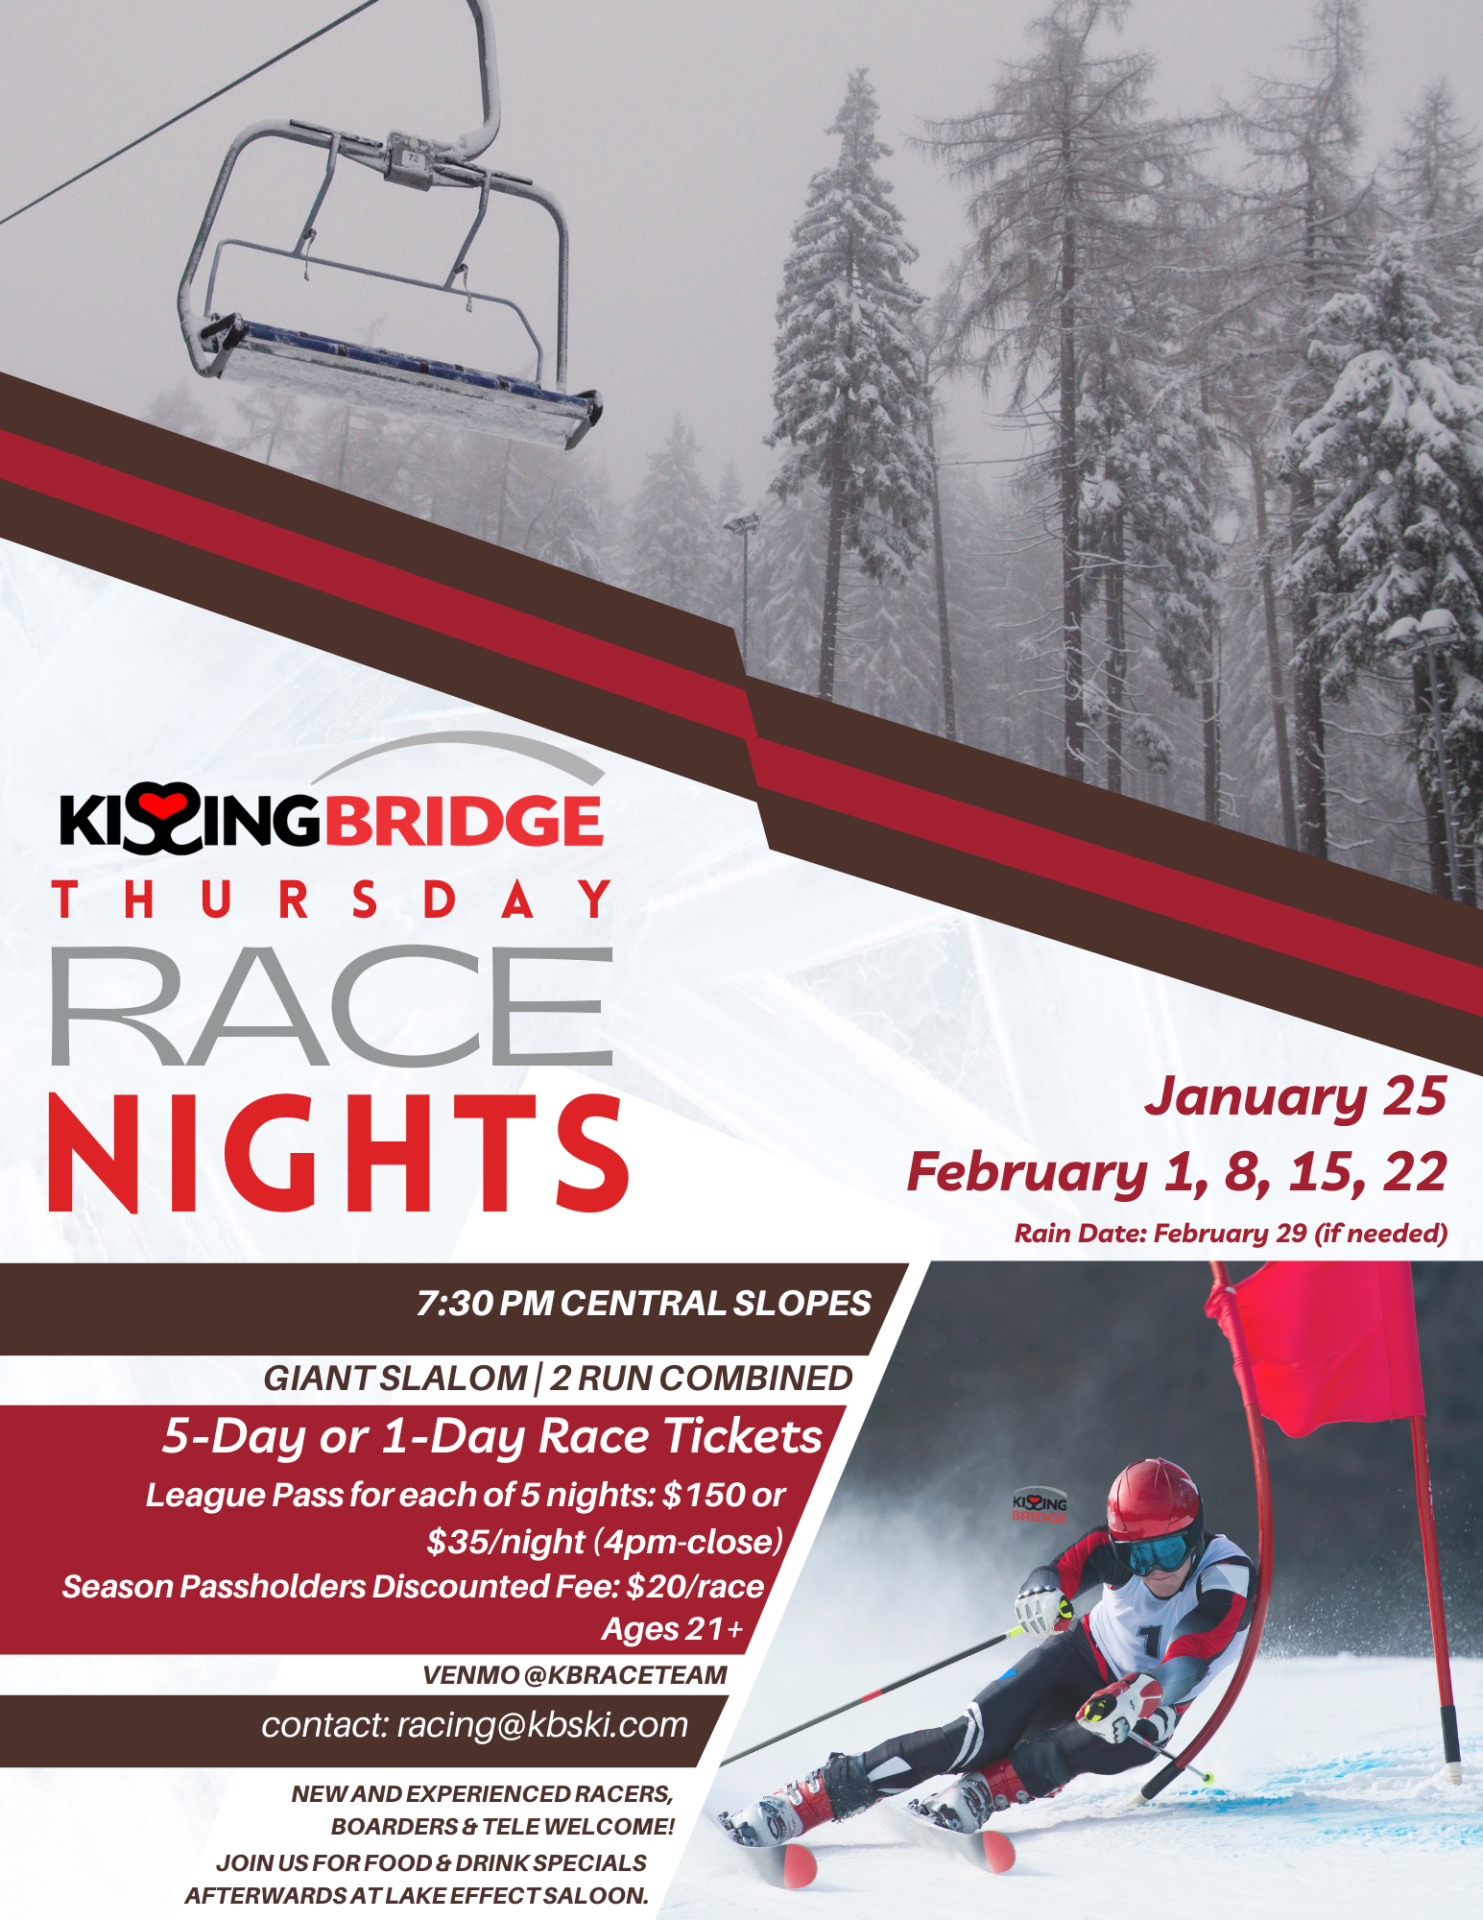 Kissing Bridge Adult Race Nights are on January 18, 25, February 1, 8, 15 and there is a rain date of February 29. New and experienced skiers, boarders and telemark skiers are welcome. Thursday night league pass is for 5 nights, $150 or $35 per night (4pm-close). Season Passholders receive a discount and pay only $20 per race. We meet at the central slope area at 7:30pm each Thursday. The format is Giant Slalom and 2 run combined. Gather with us afterwards in the Lake Effect Saloon for food and drink specials. Ages 21 & up.